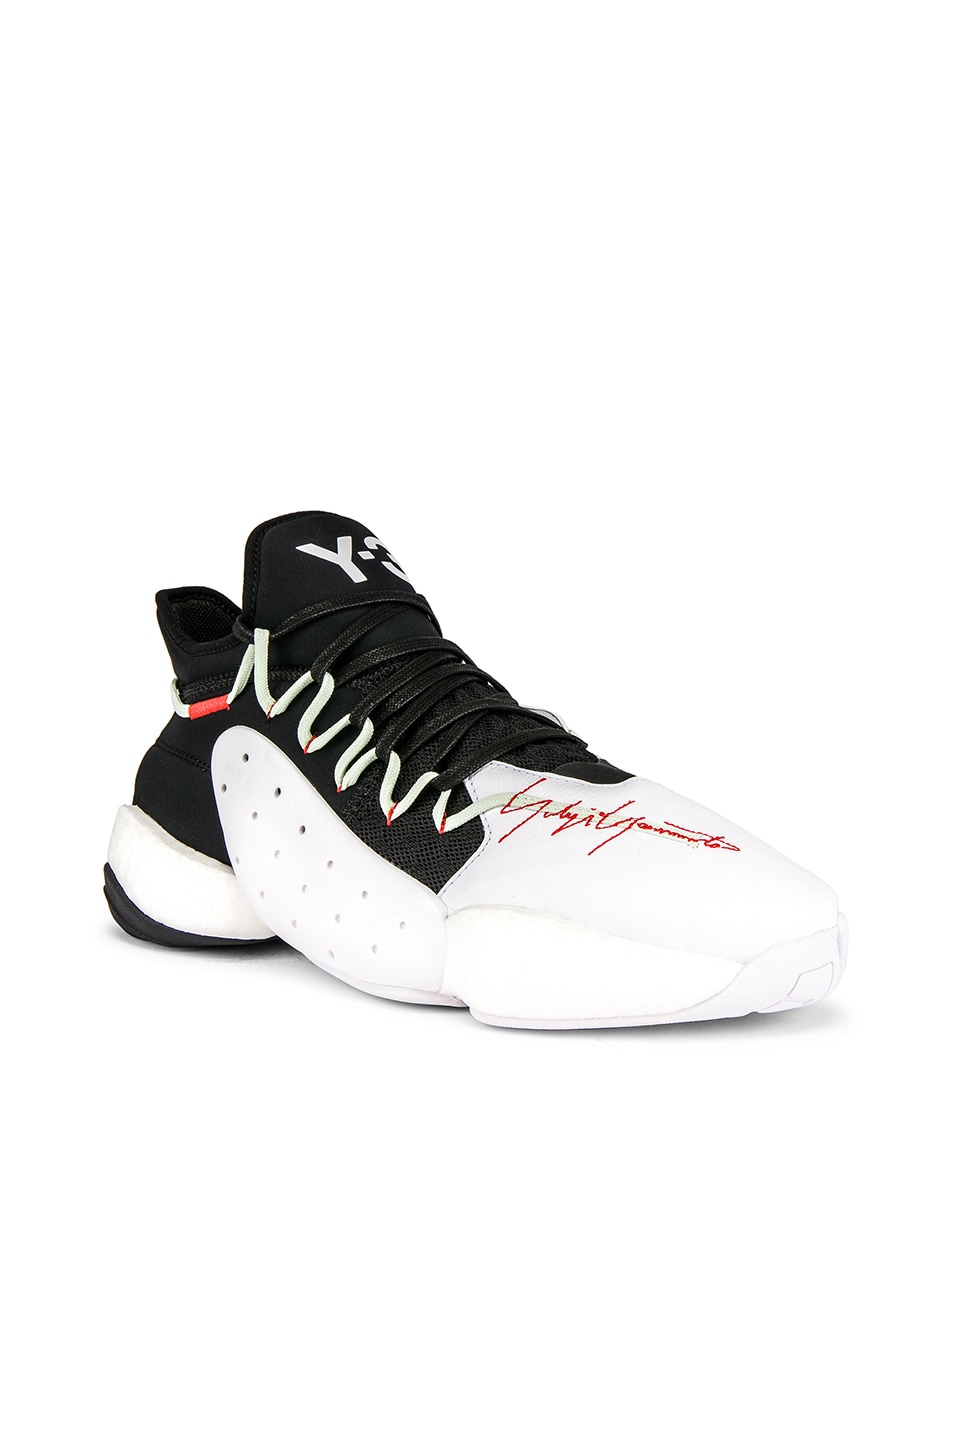 Image 1 of Y-3 Yohji Yamamoto BYW Bball Sneakers in Black & White